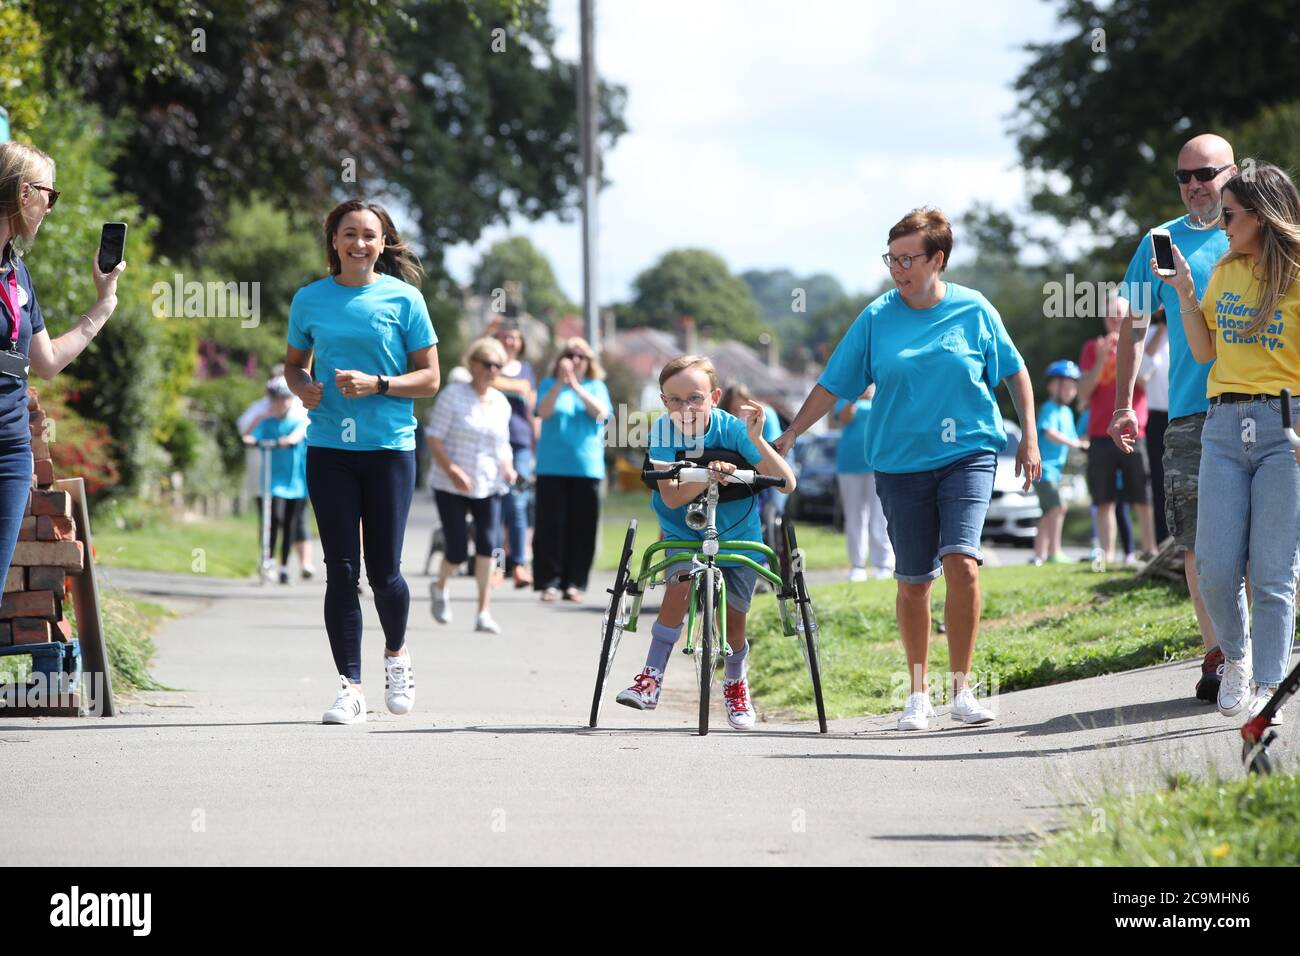 Tobias Weller, who has cerebral palsy and autism, alongside Olympic athlete Jessica Ennis-Hill (left), has nearly completed his new challenge to run a marathon in the street outside his home in Sheffield, using a race runner. Tobias, who cannot stand or walk unaided, was inspired by Captain Tom Moore to complete his first marathon on his daily walks back in April. Stock Photo